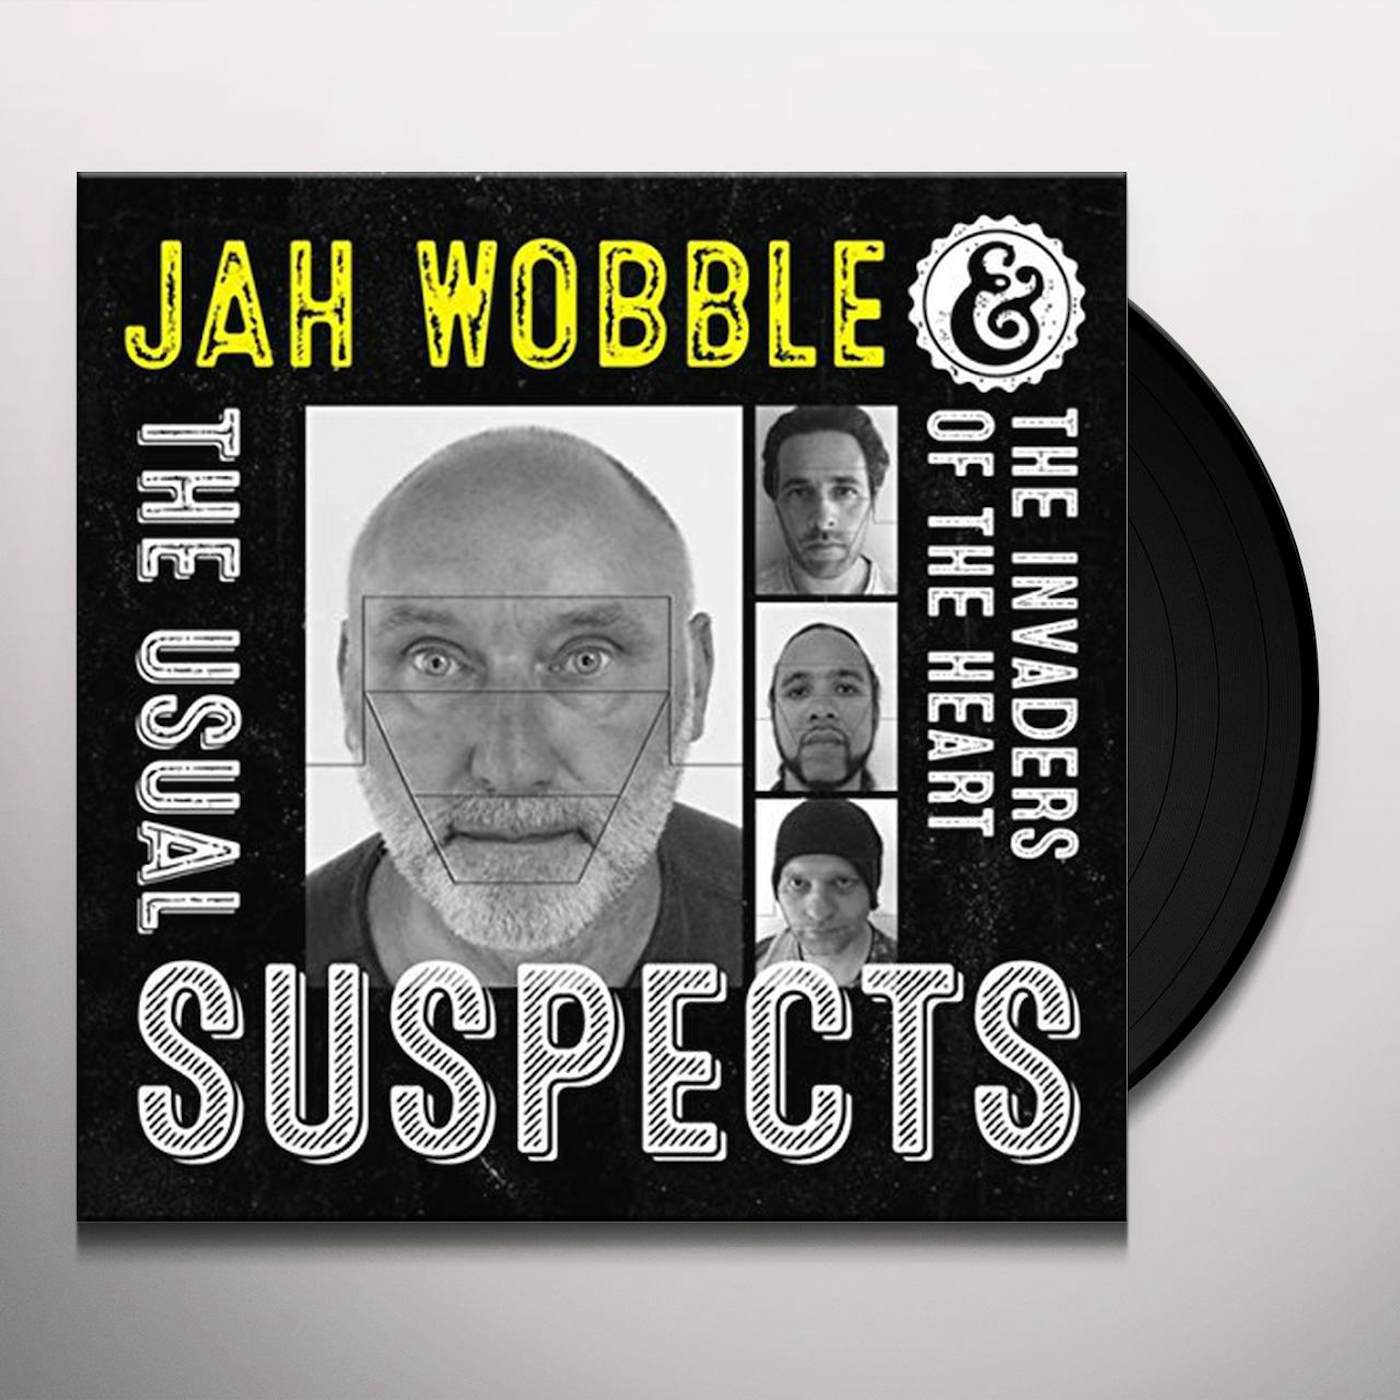 Jah Wobble & The Invaders of the Heart USUAL SUSPECTS Vinyl Record